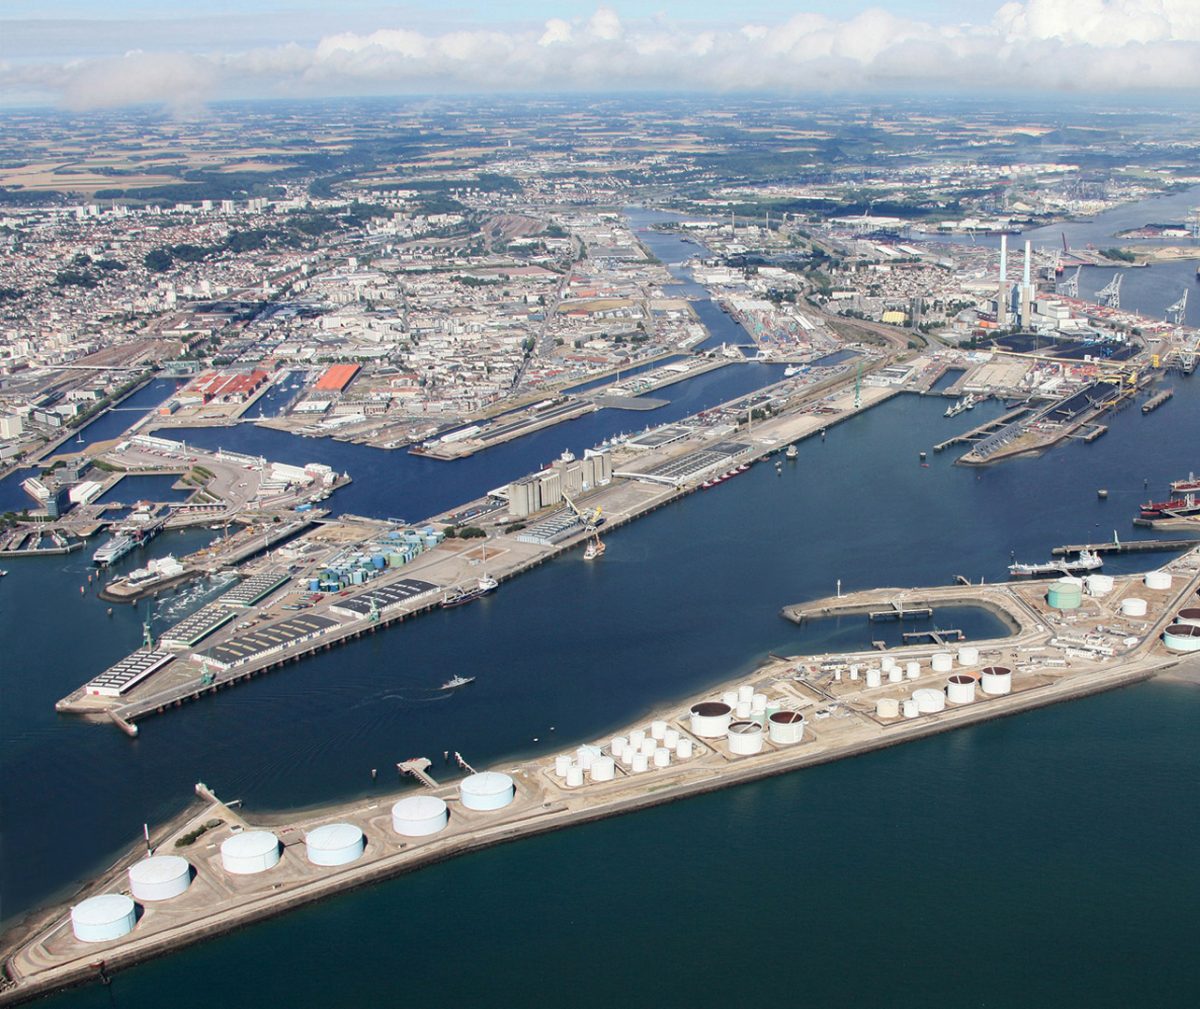 An aerial view of an expansive industrial port complex. The port features numerous docks, warehouses, and storage tanks along its waterfront. Large cylindrical tanks, likely used for storing petroleum or other bulk liquids, are prominently visible in the foreground.